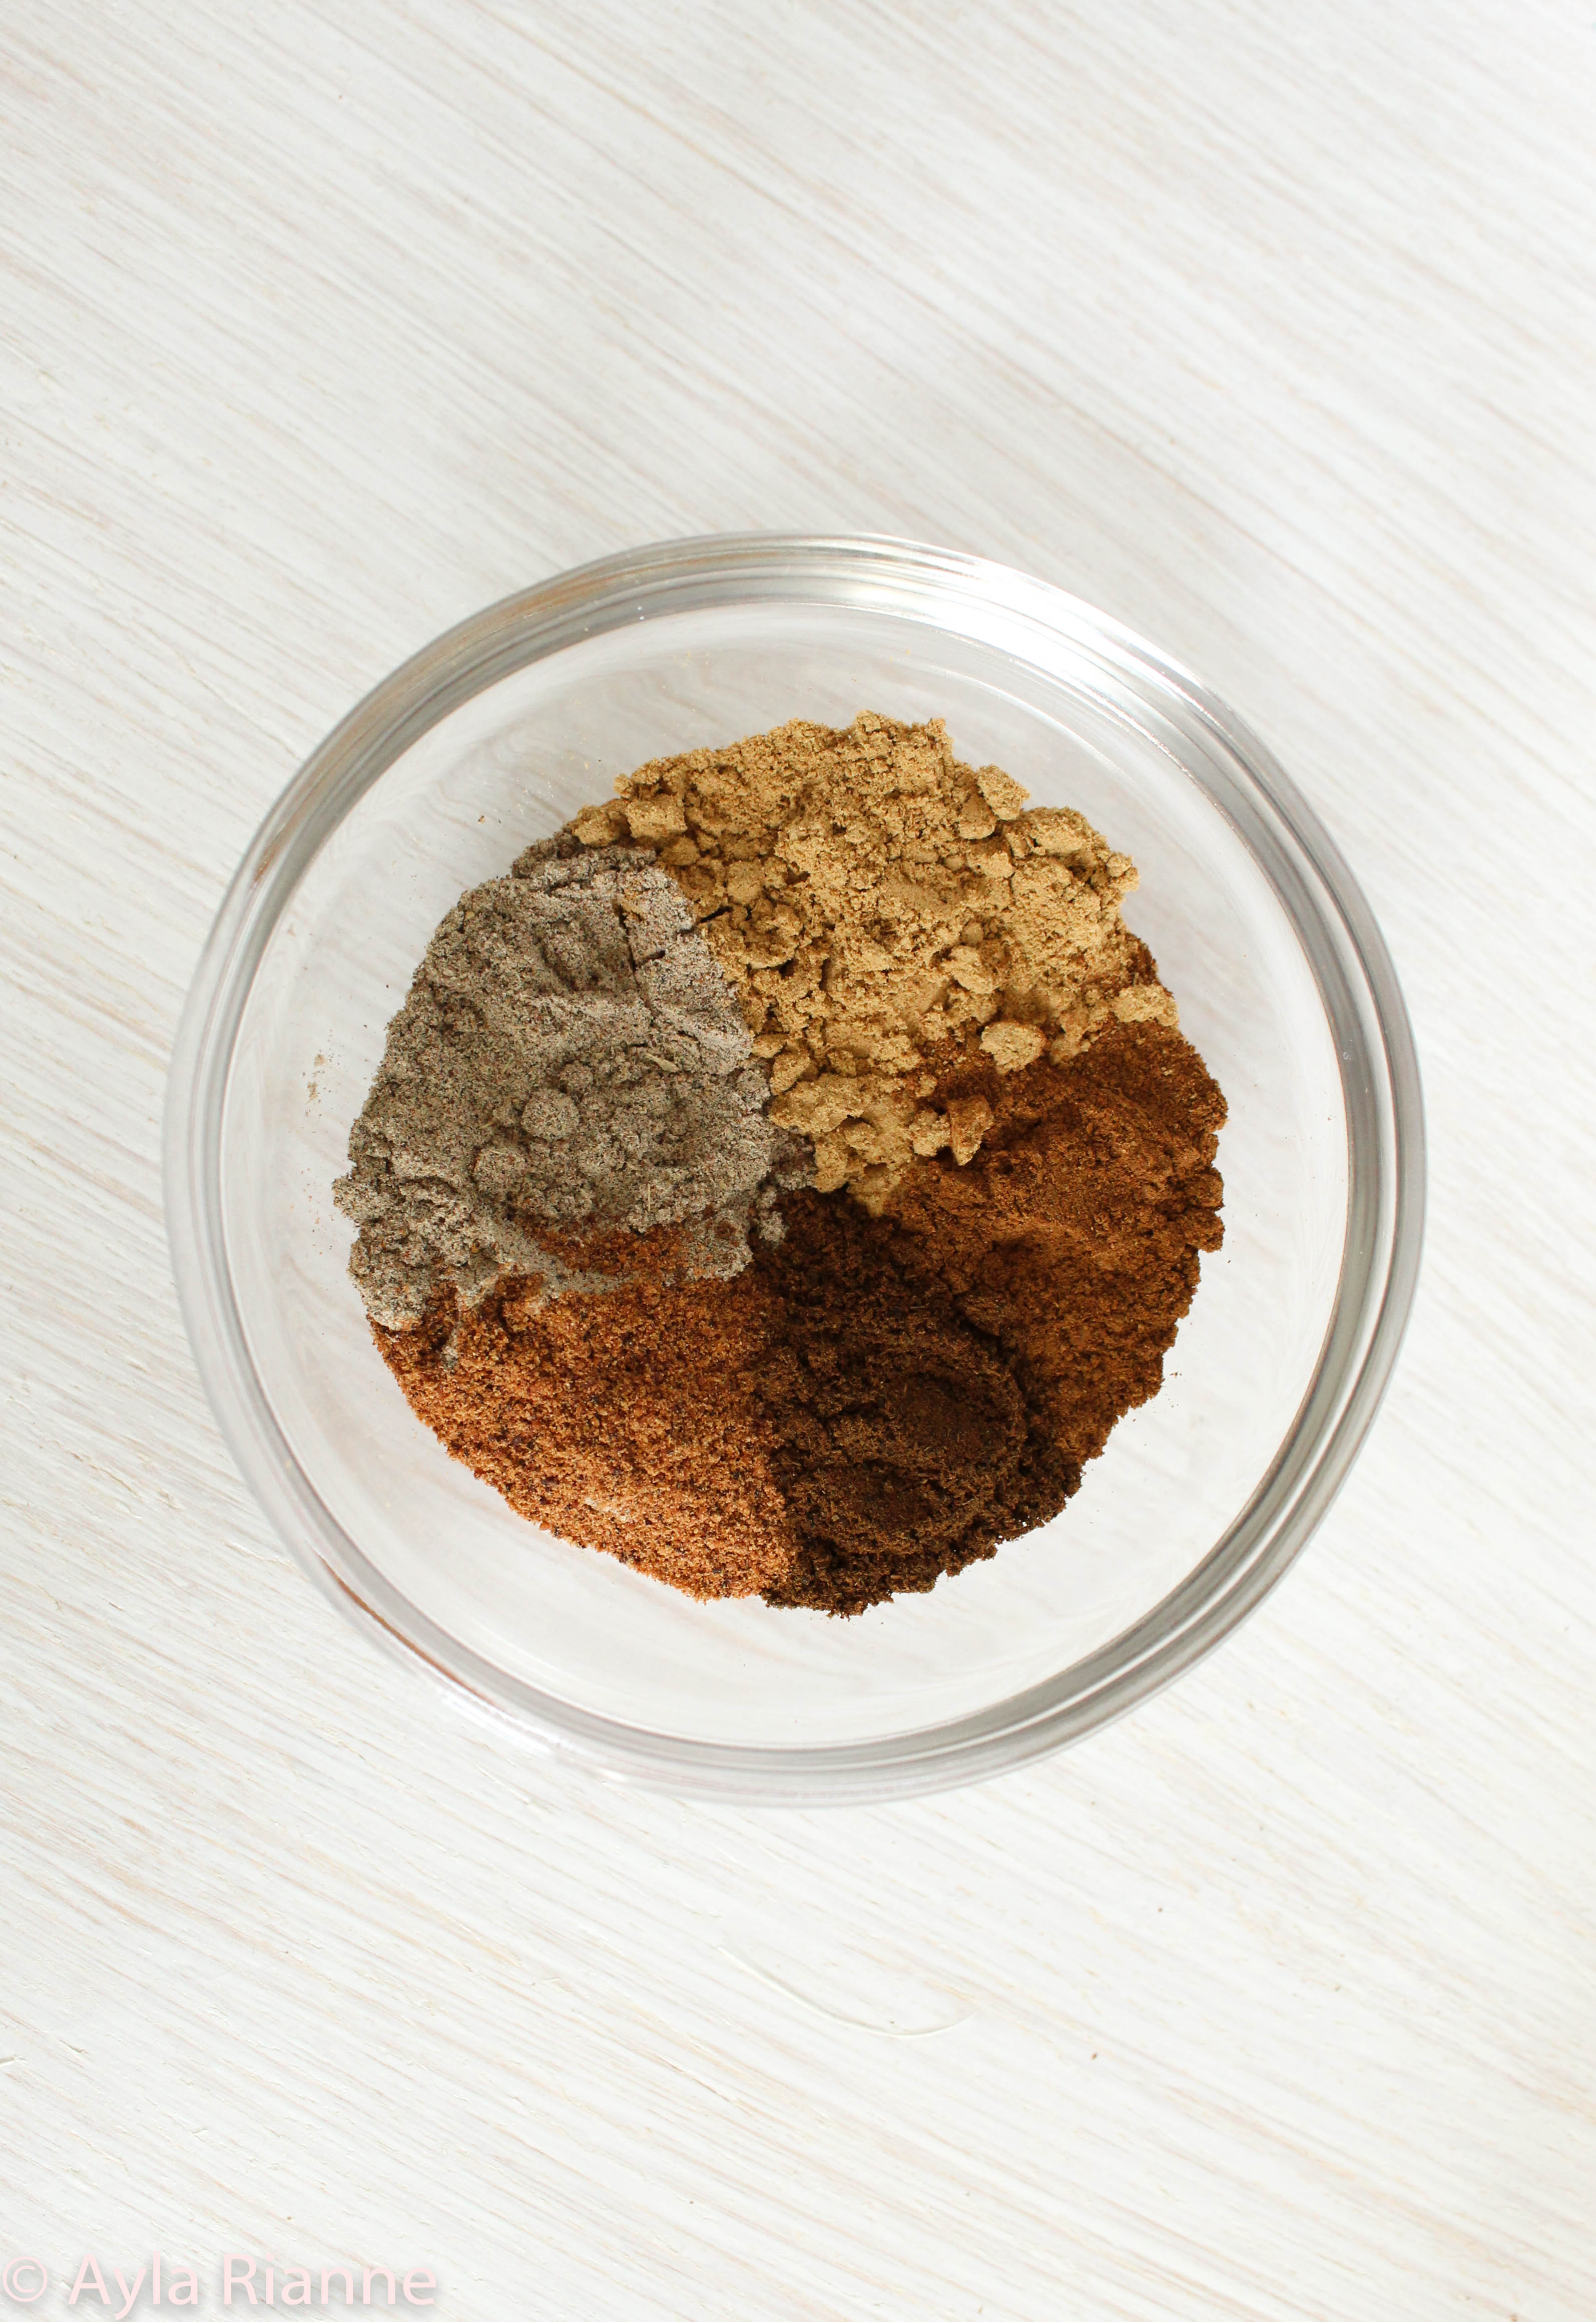 Chai spice mixture made of five different spices #chaispice